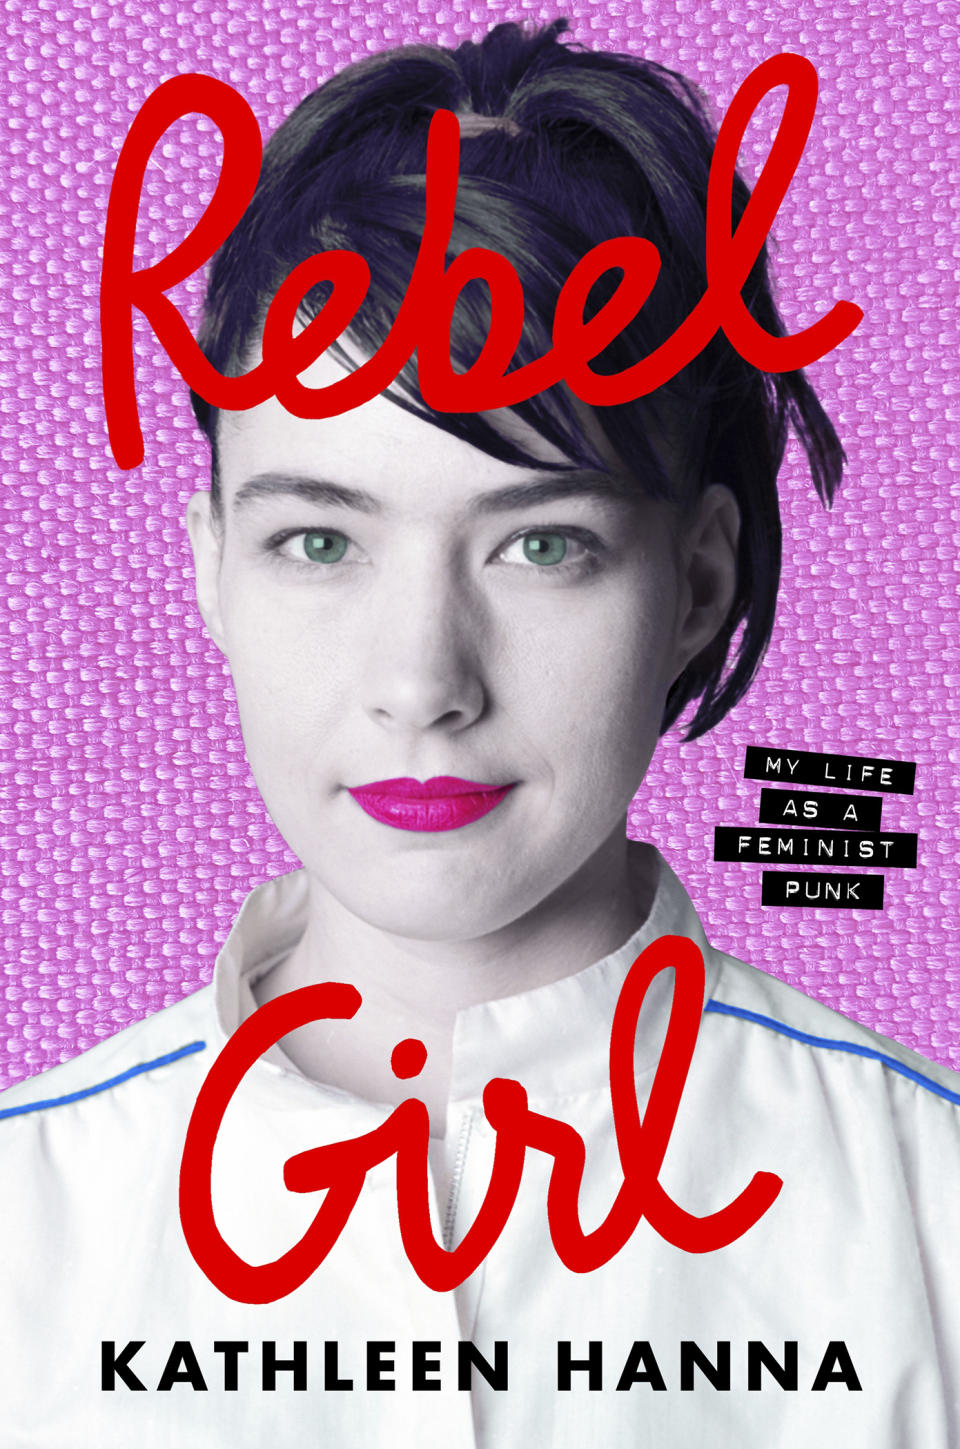 This cover image released by Ecco shows "Rebel Girl: My Life as a Feminist Punk" by Kathleen Hanna. (Ecco via AP)